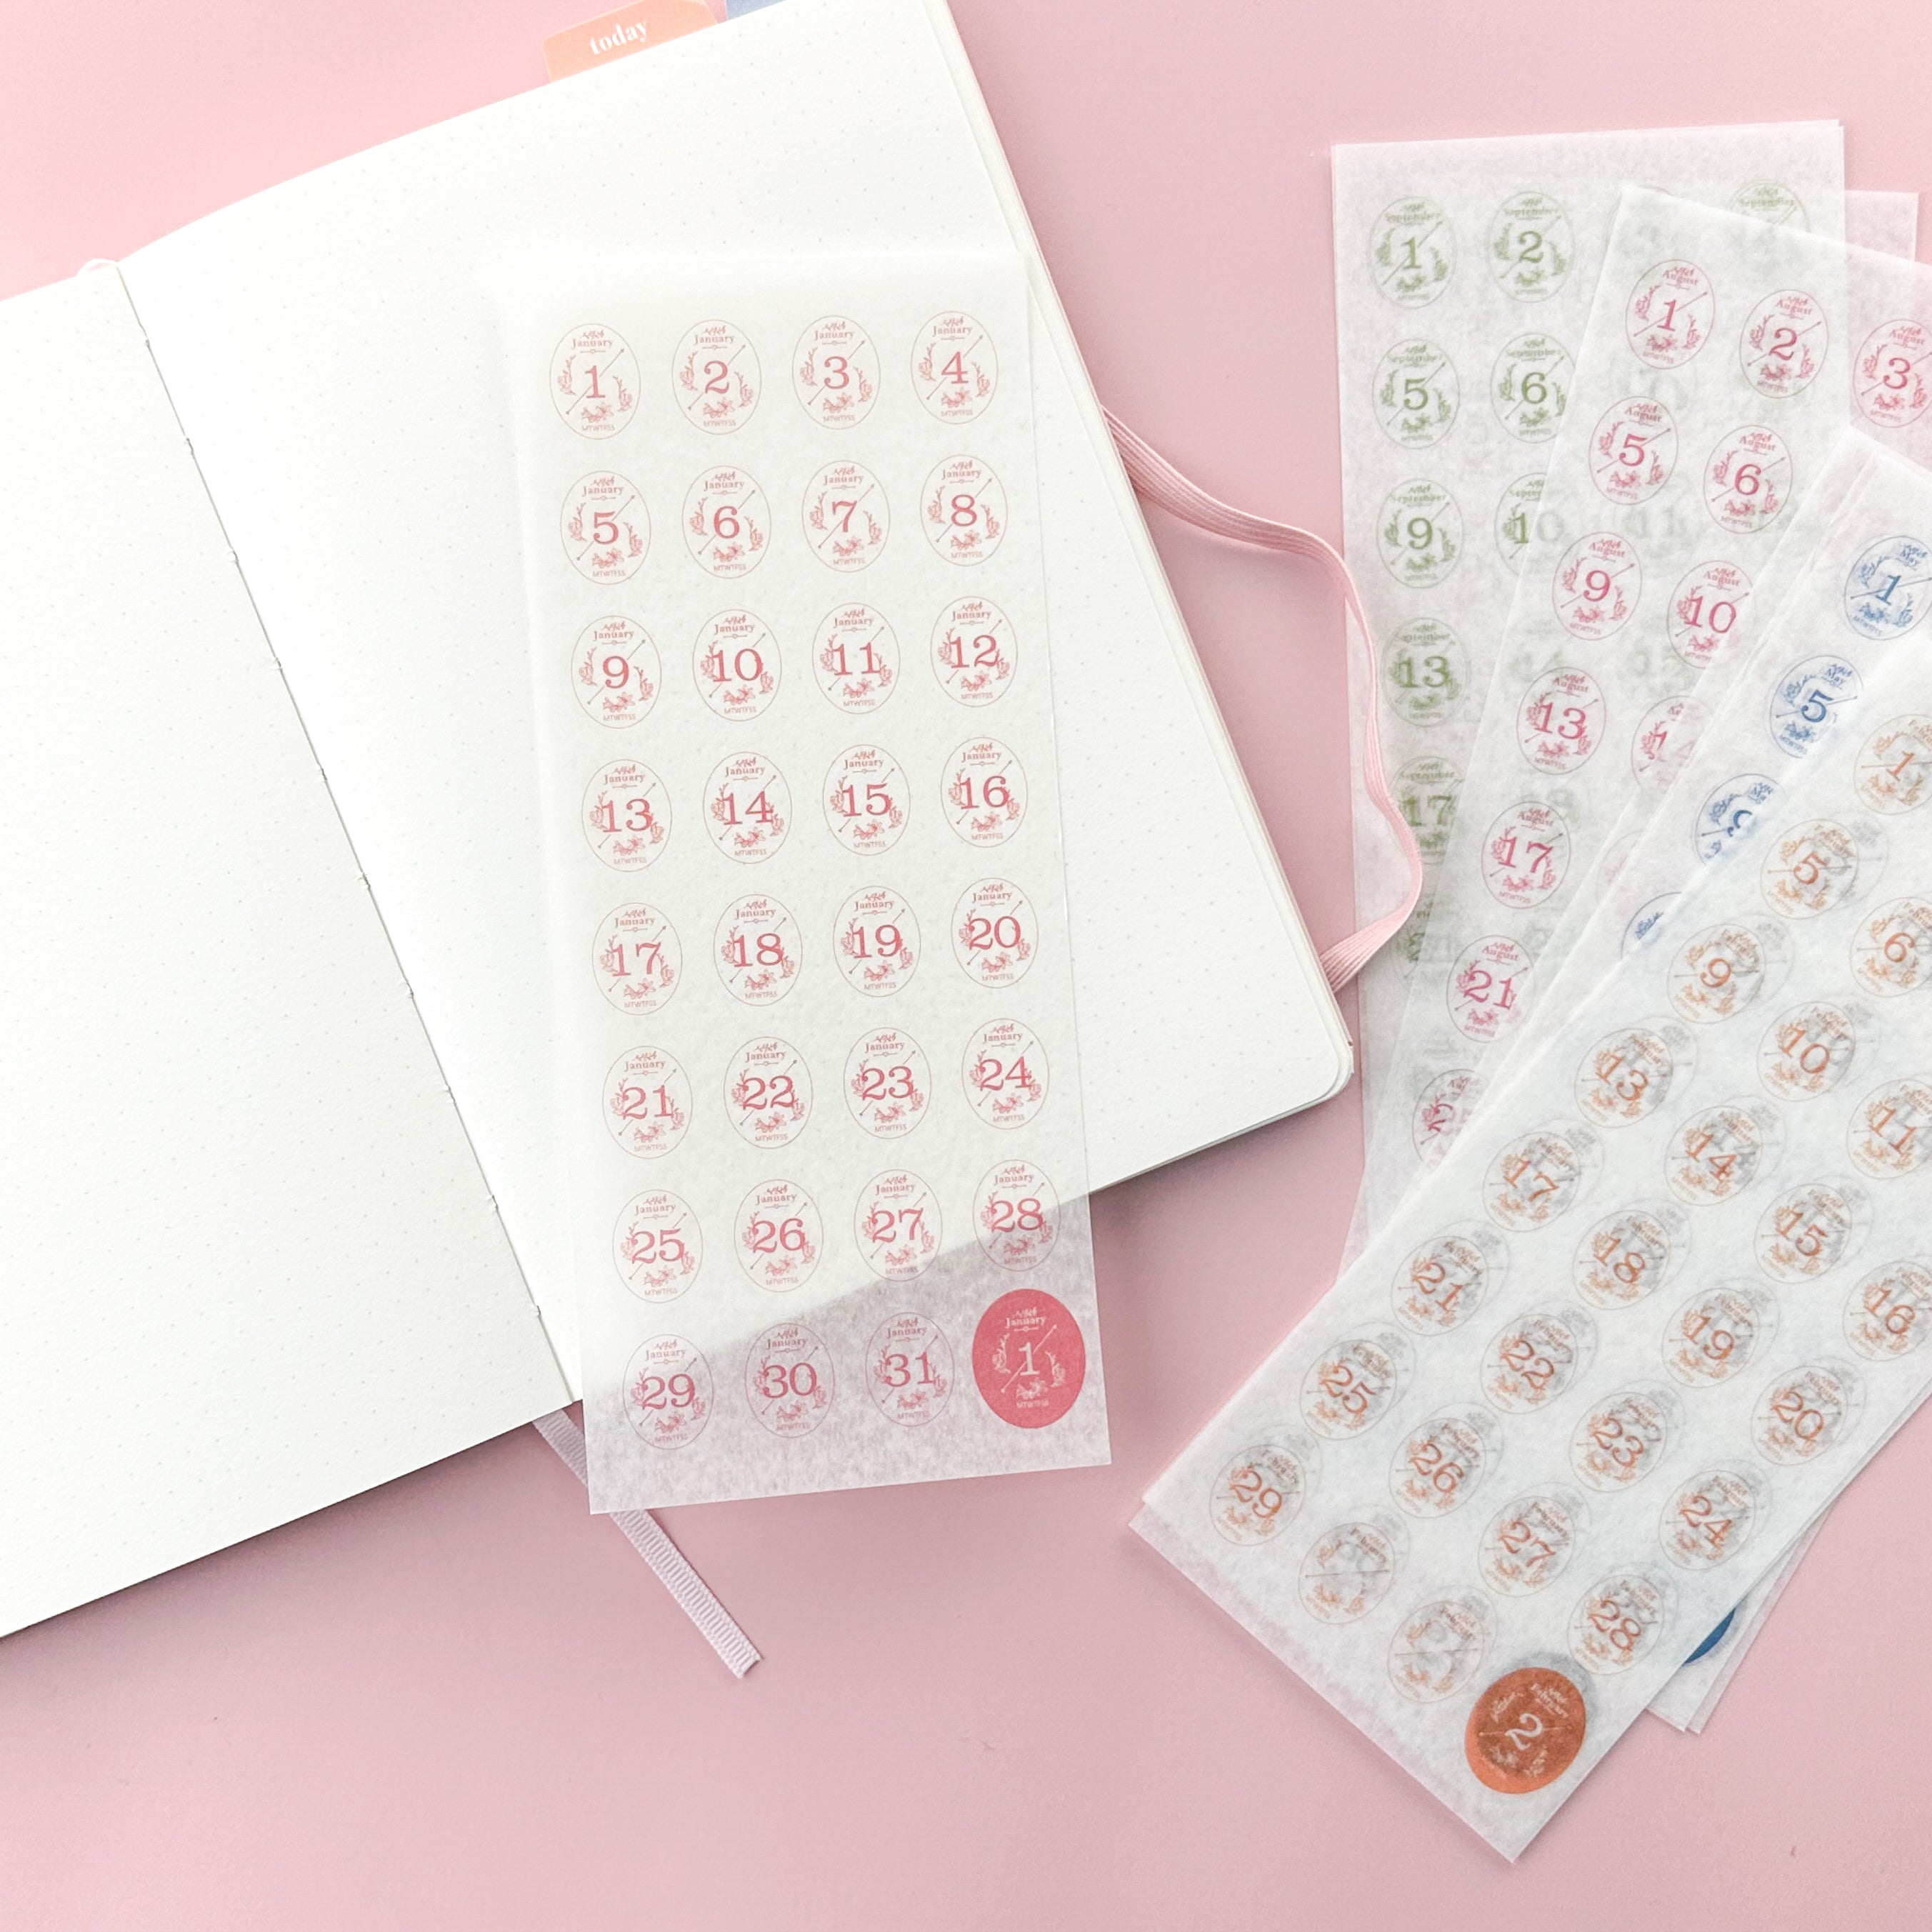 These are pre-dated monthly stickers for your monthly planner or BUJO spreads. These stickers are sold at BBB Supplies Craft Shop.